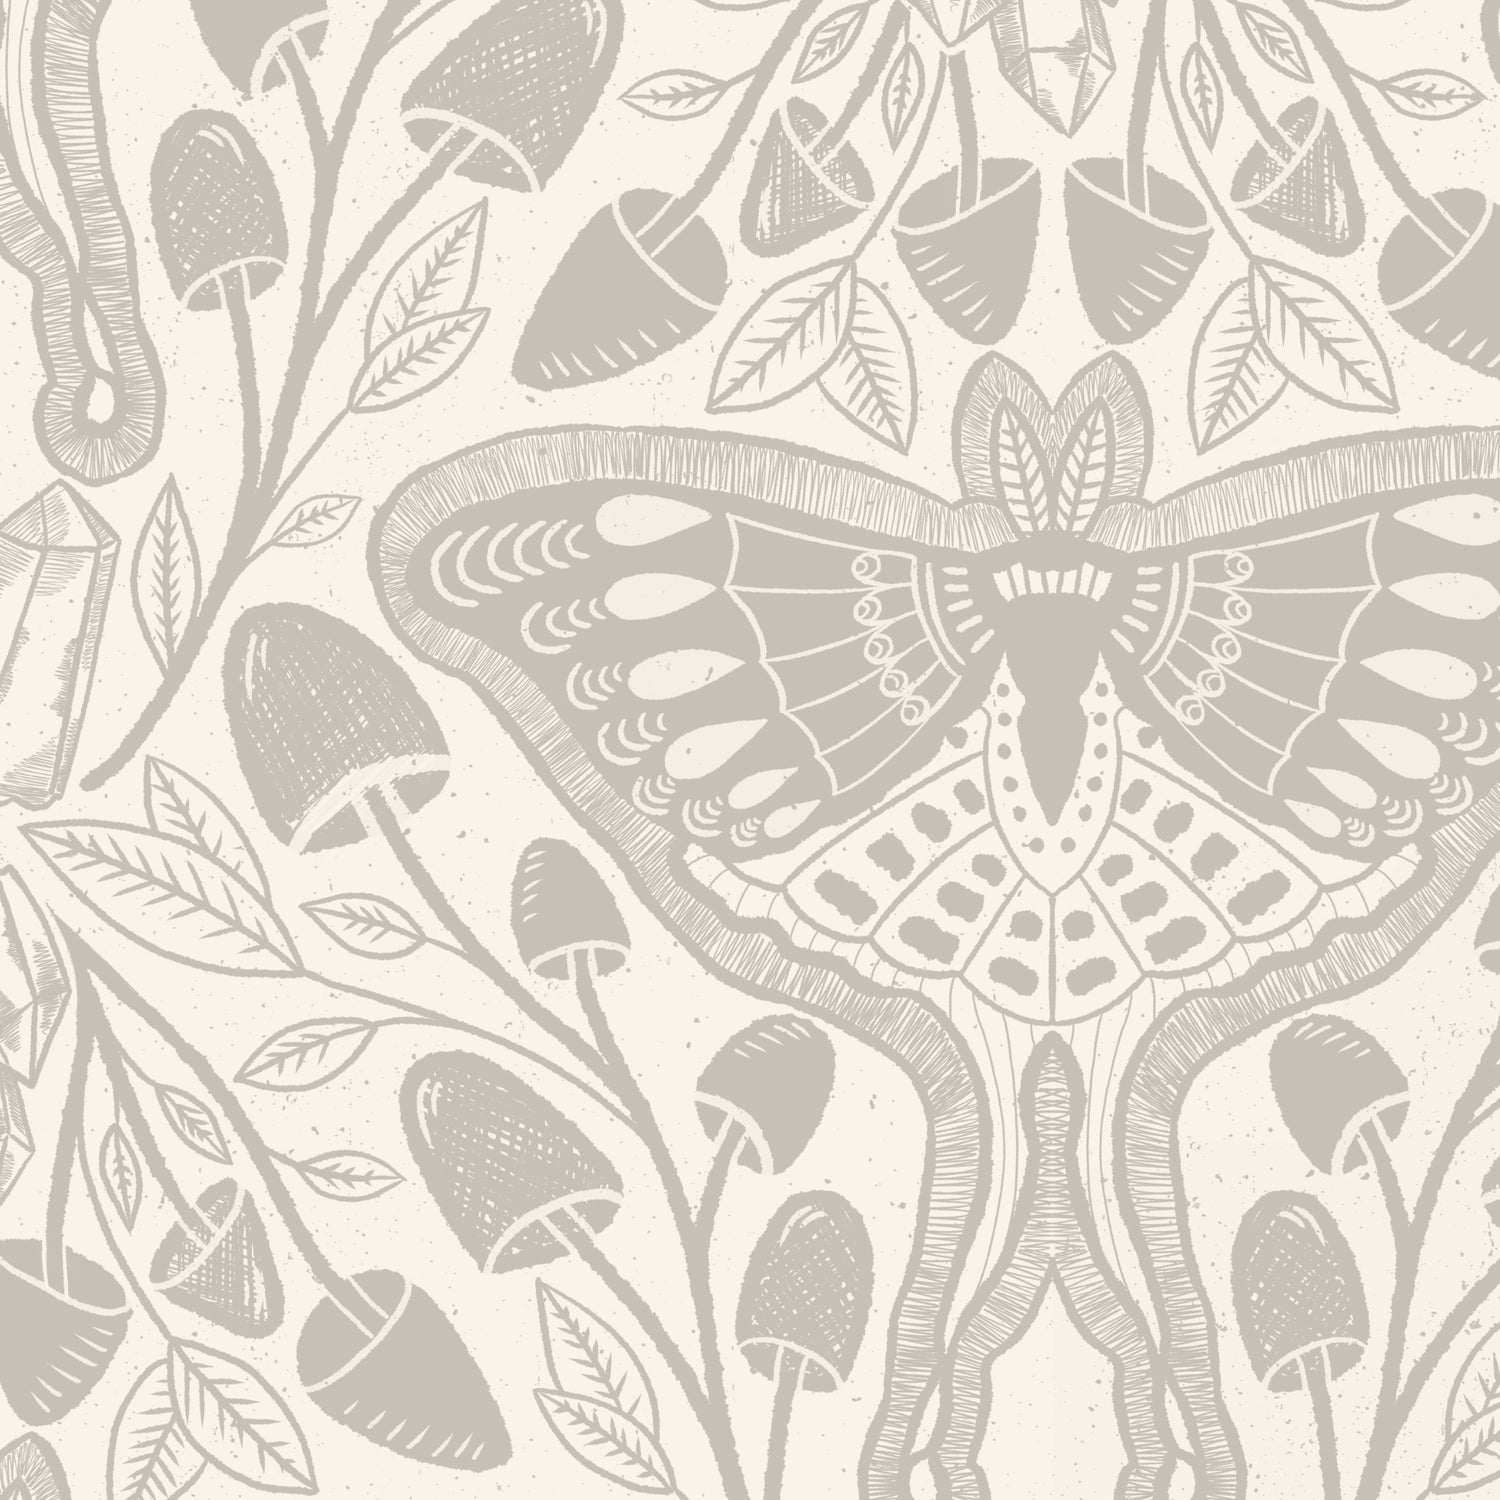 Luna Moths Wallpaper in Gray shown in a close up view.